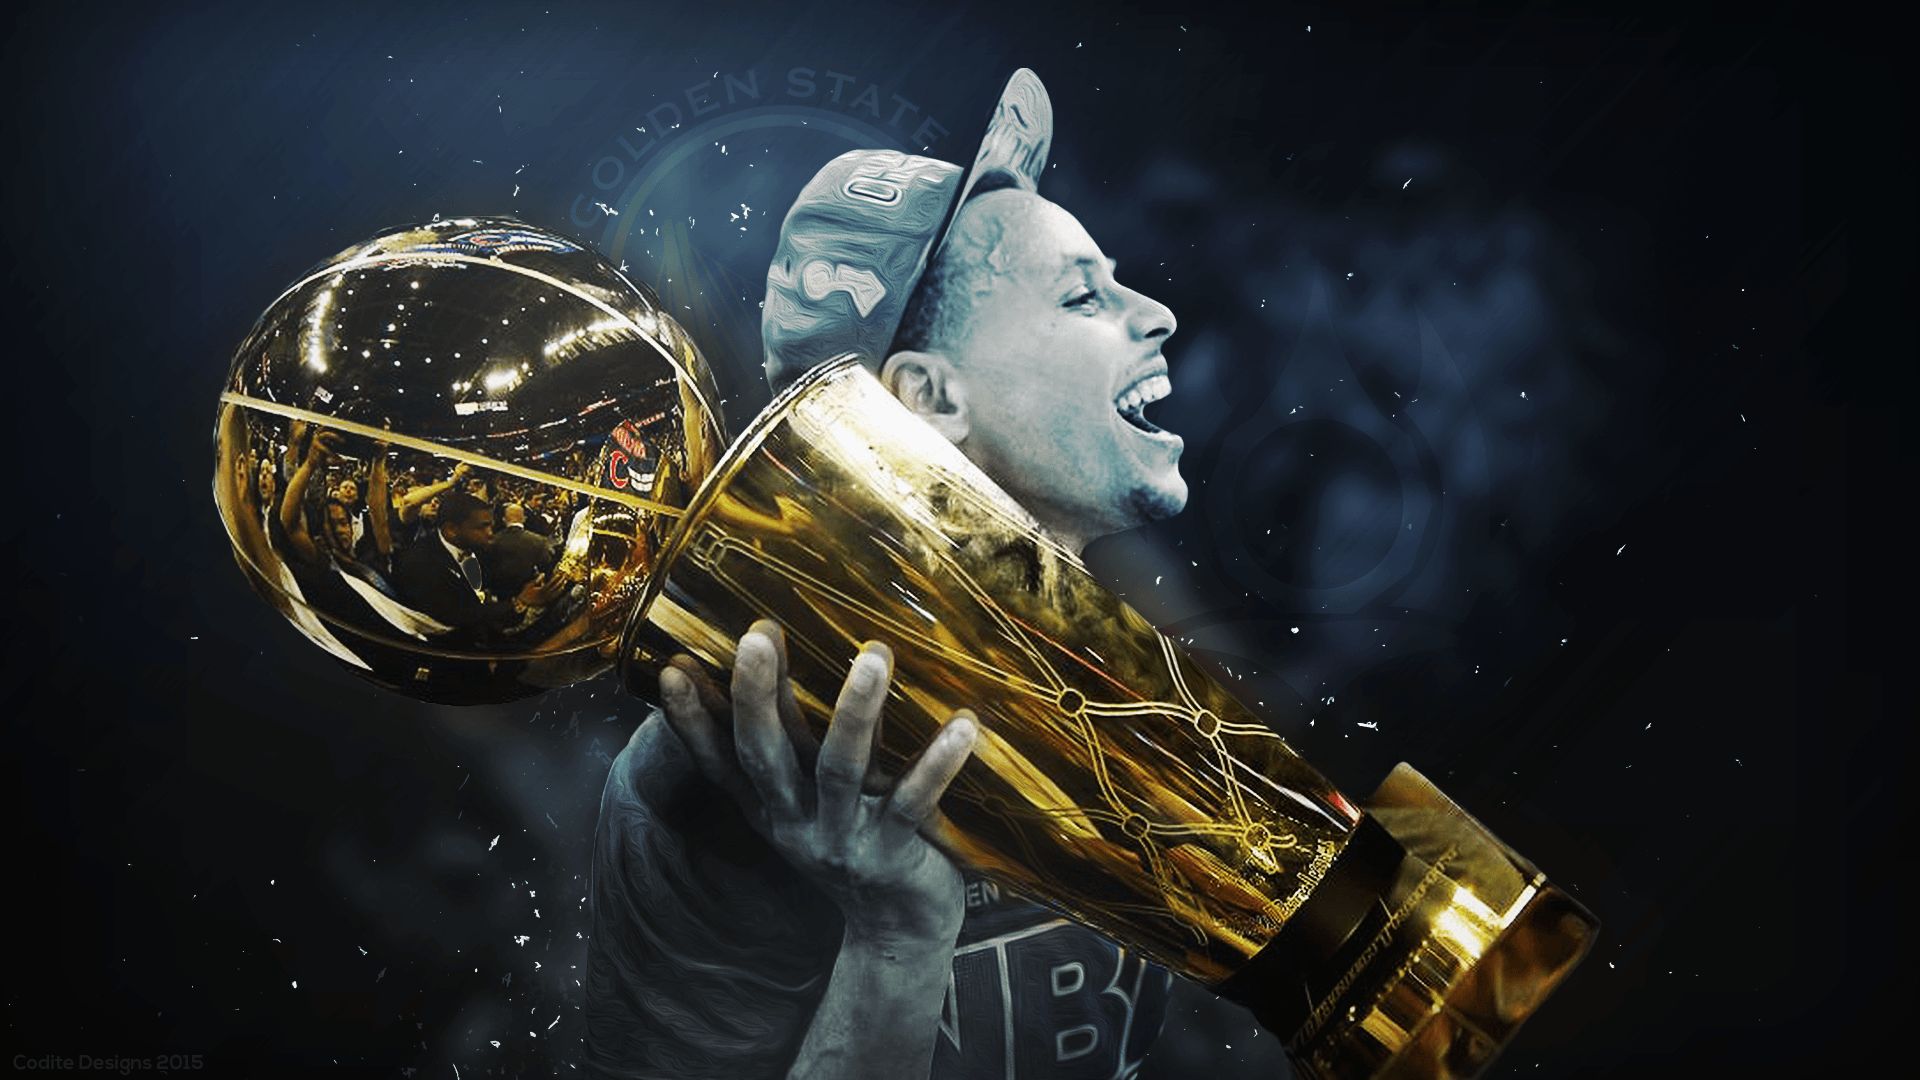 Wallpaper.wiki Stephen Curry Android Wallpaper HD PIC WPE00861